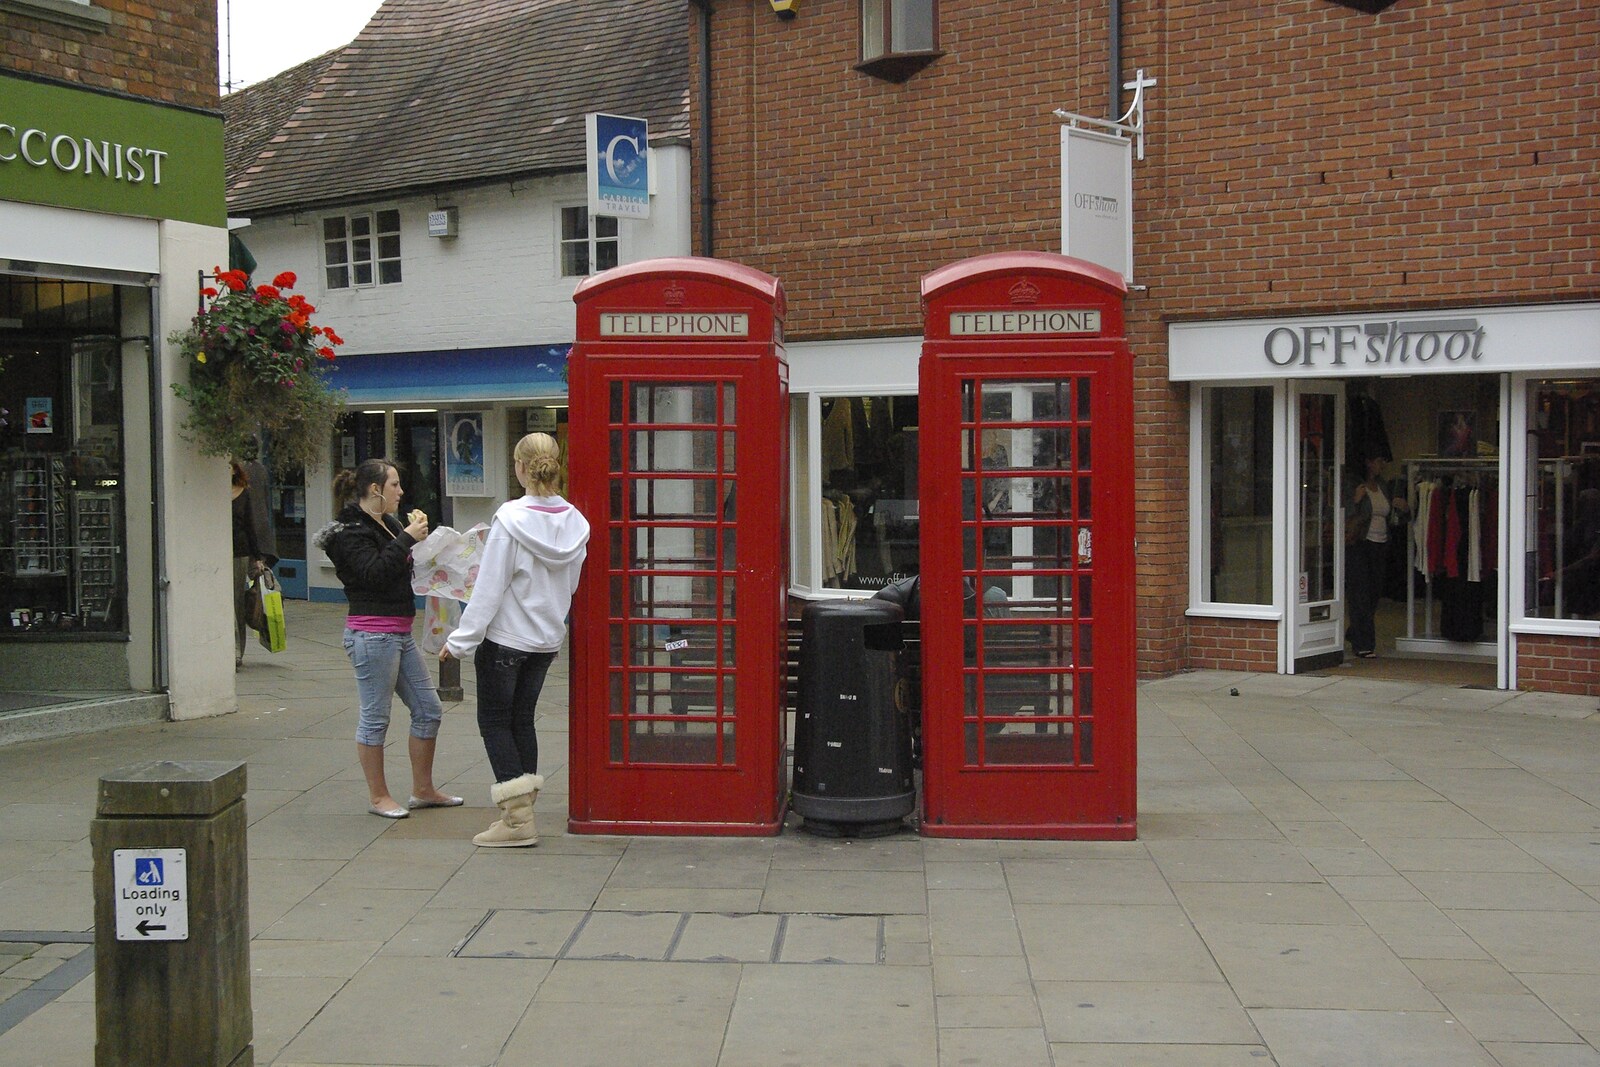 A couple of girls eat chips near K6 phone boxes from A BSCC Presentation, and Matt's Wedding Reception, Solihull - 6th October 2007